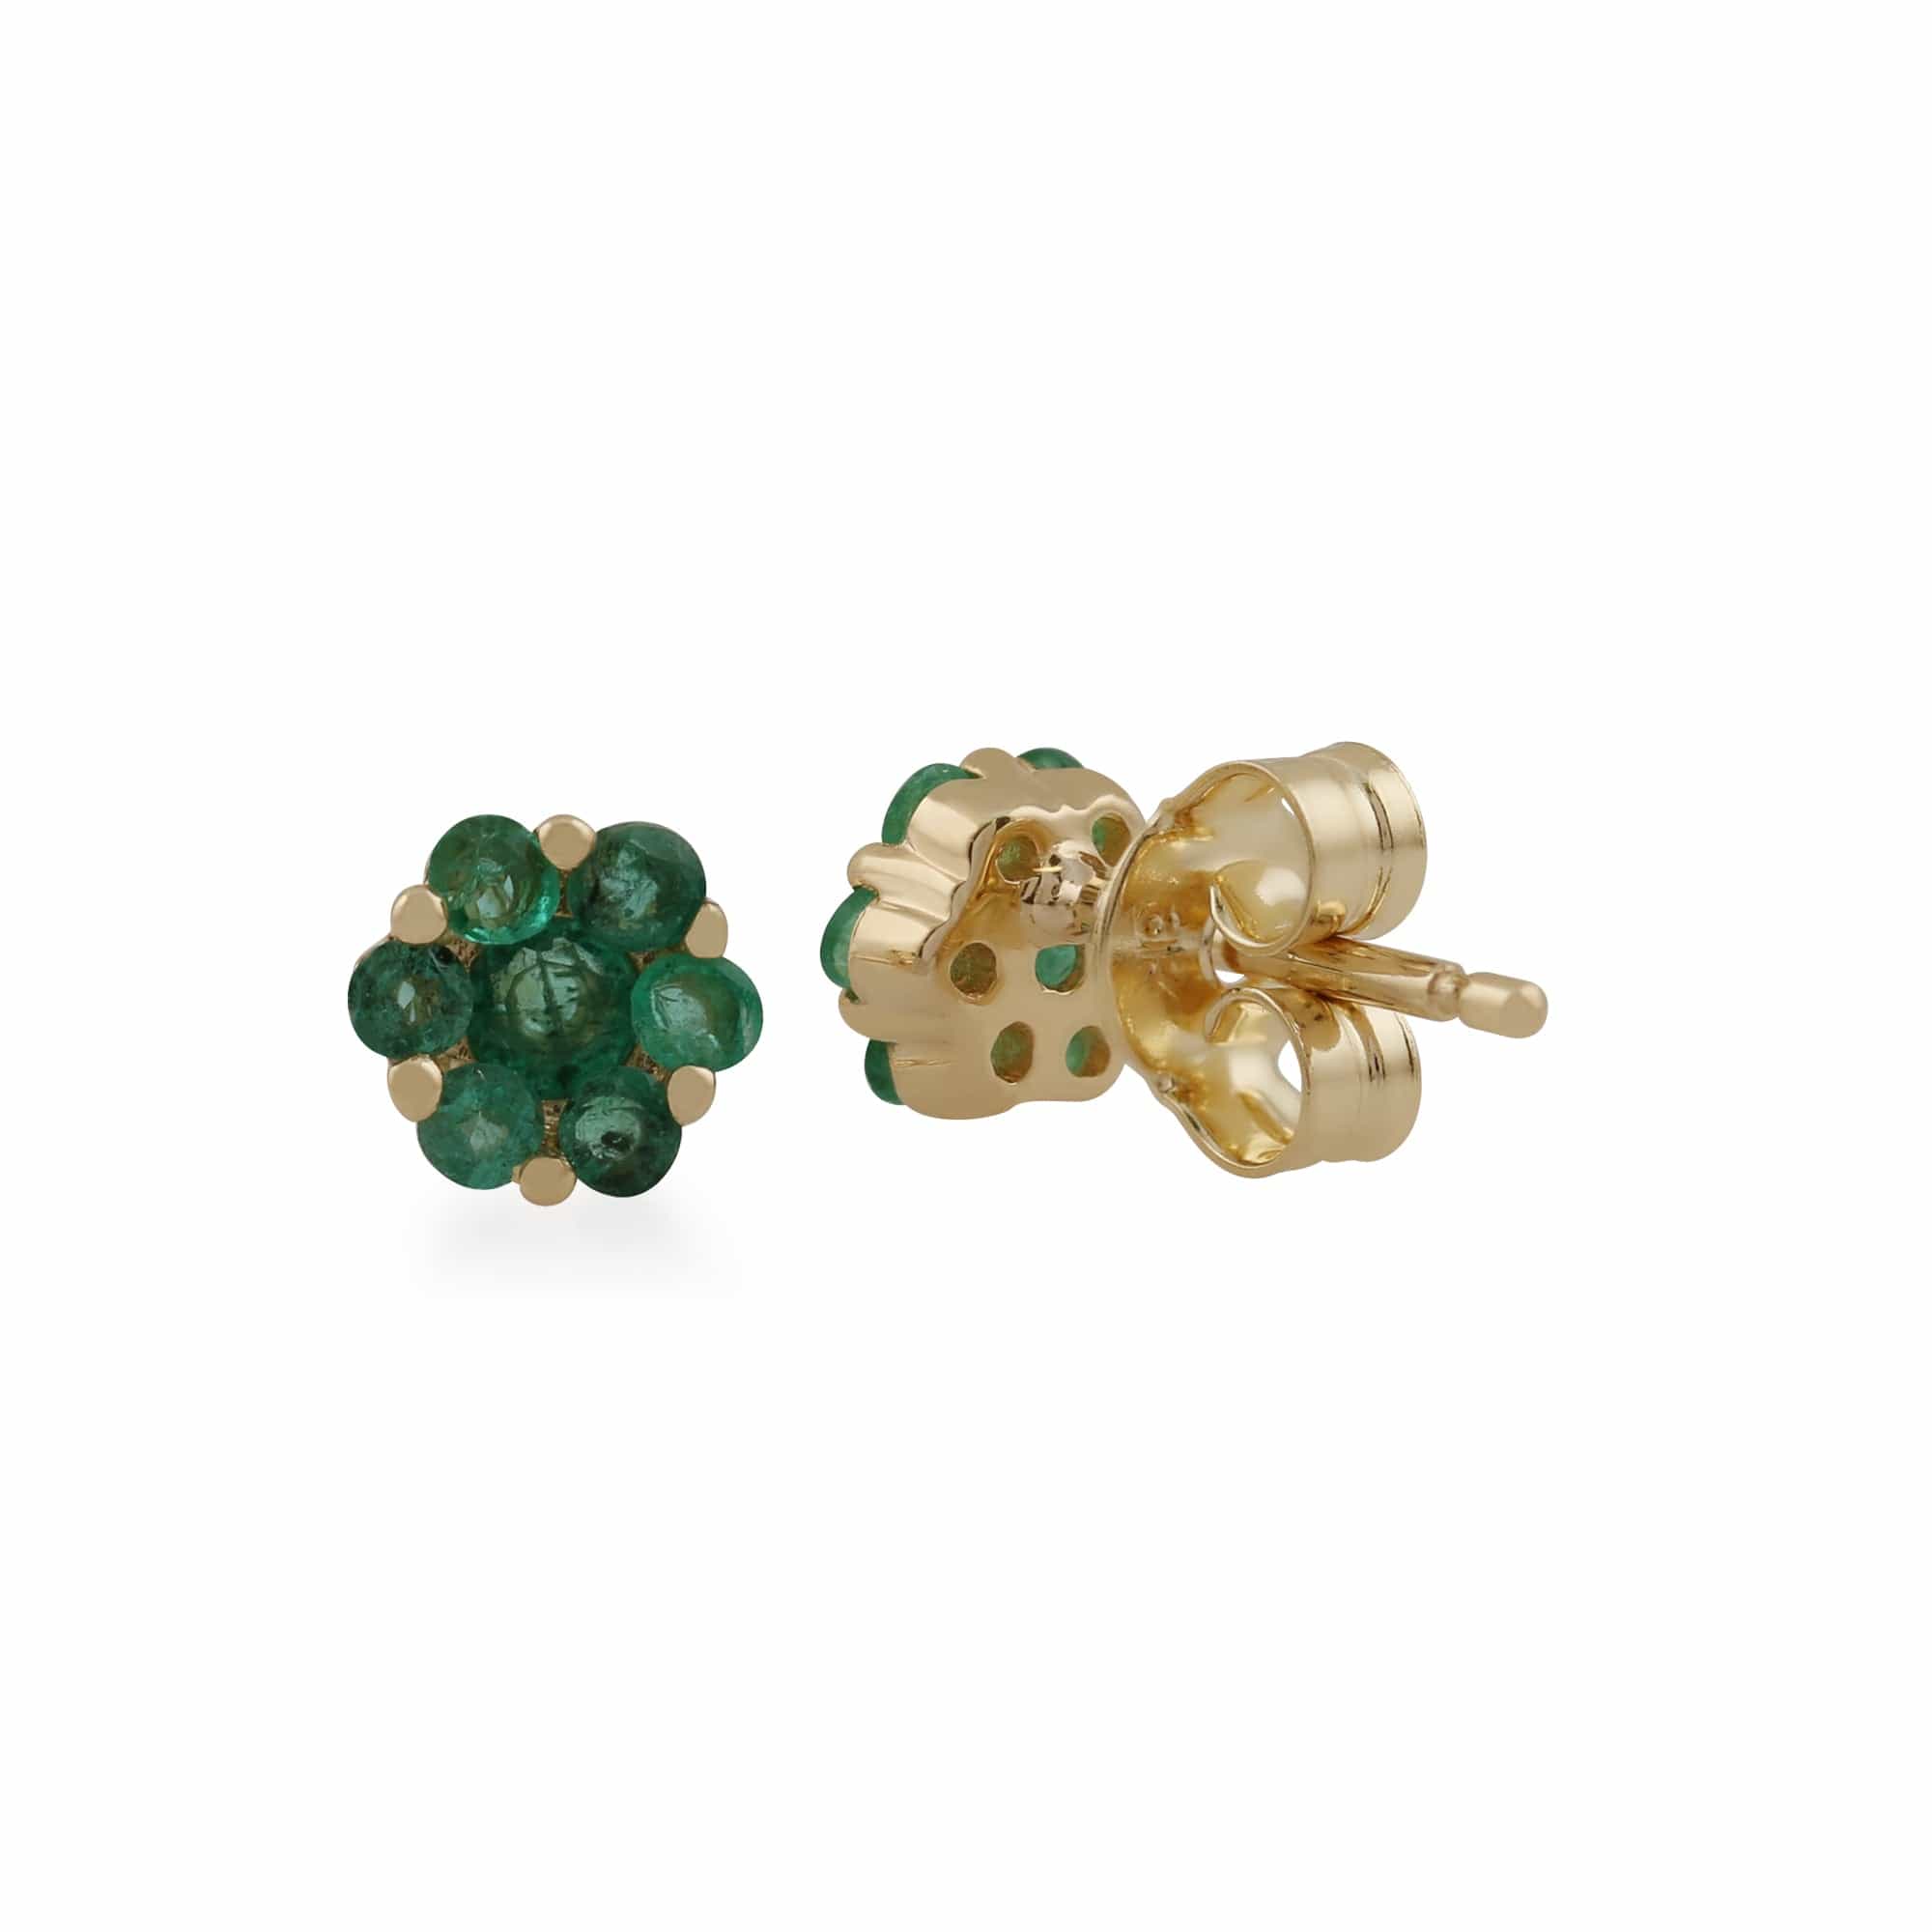 Floral Round Emerald Cluster Stud Earrings in 9ct Yellow Gold - Gemondo